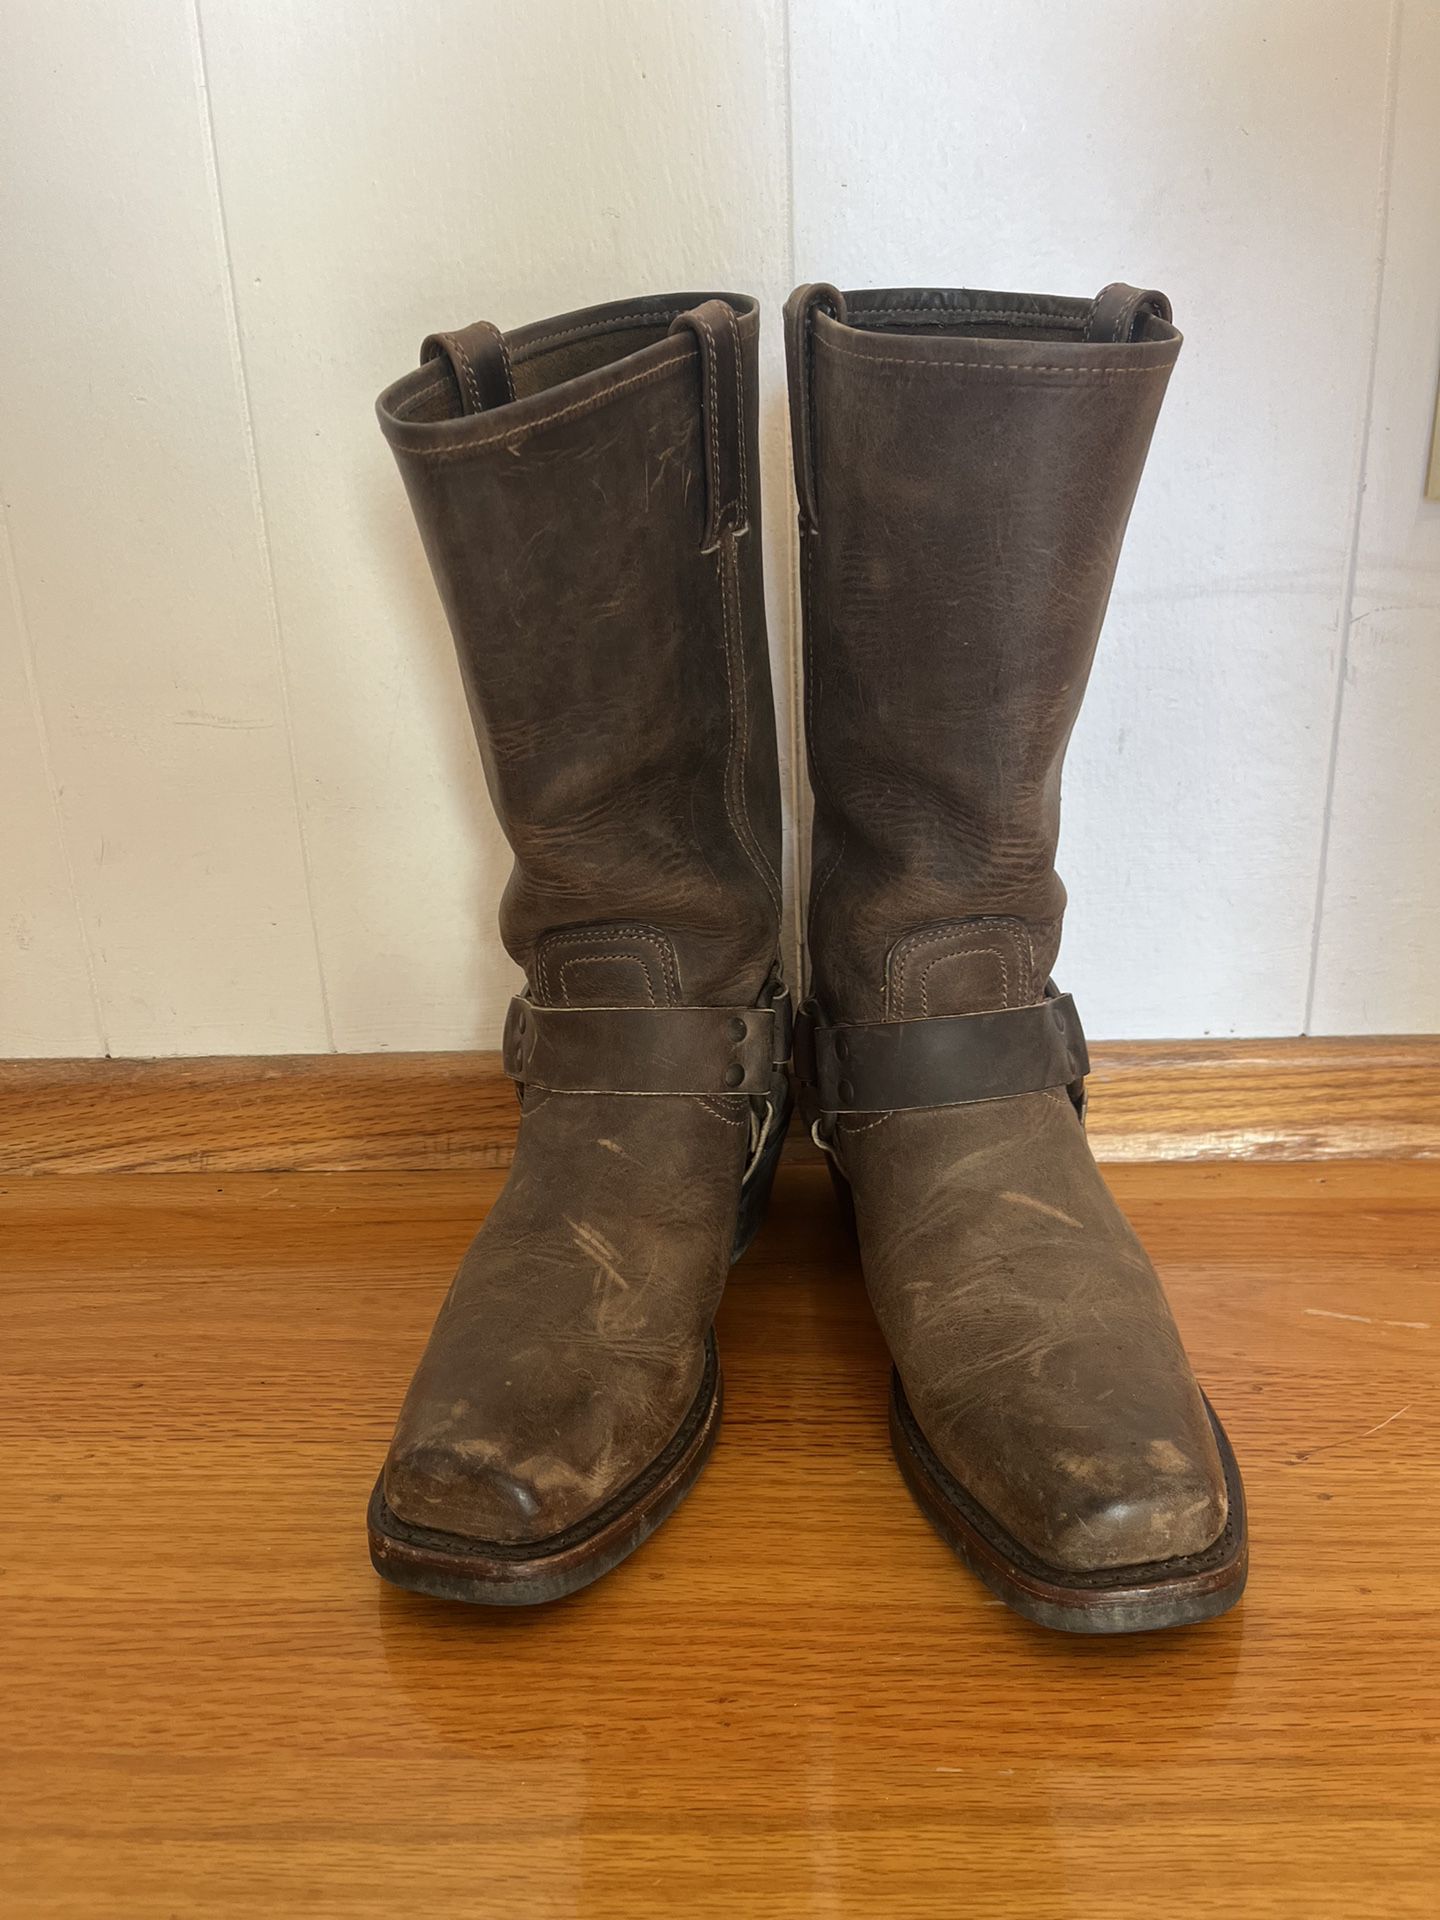 Frye - Harness 12R Boots (Size 8)